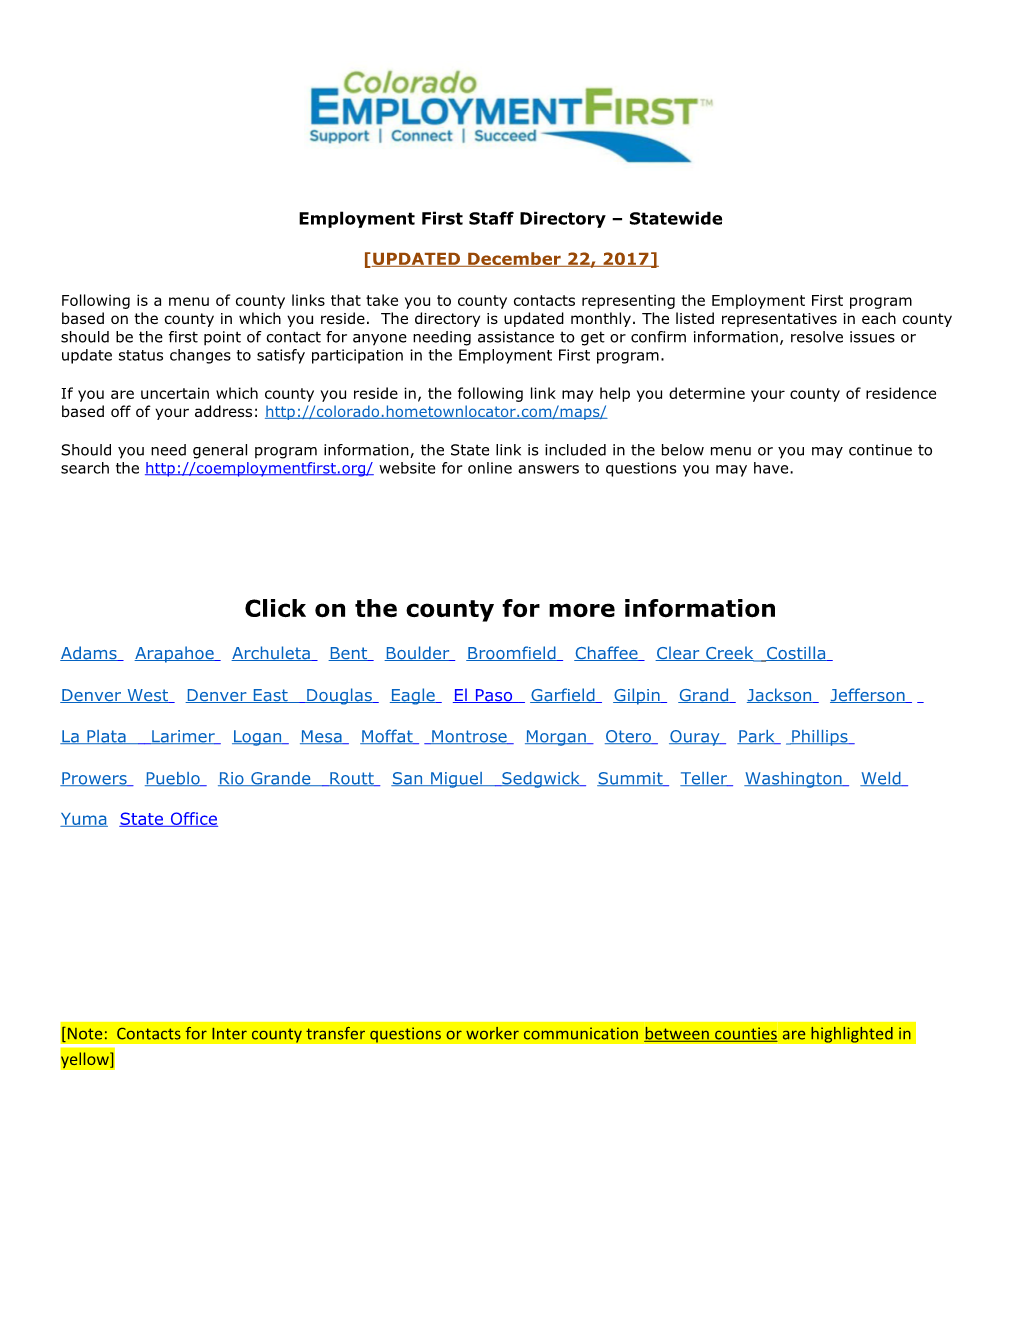 Employment First Staff Directory Statewide s1